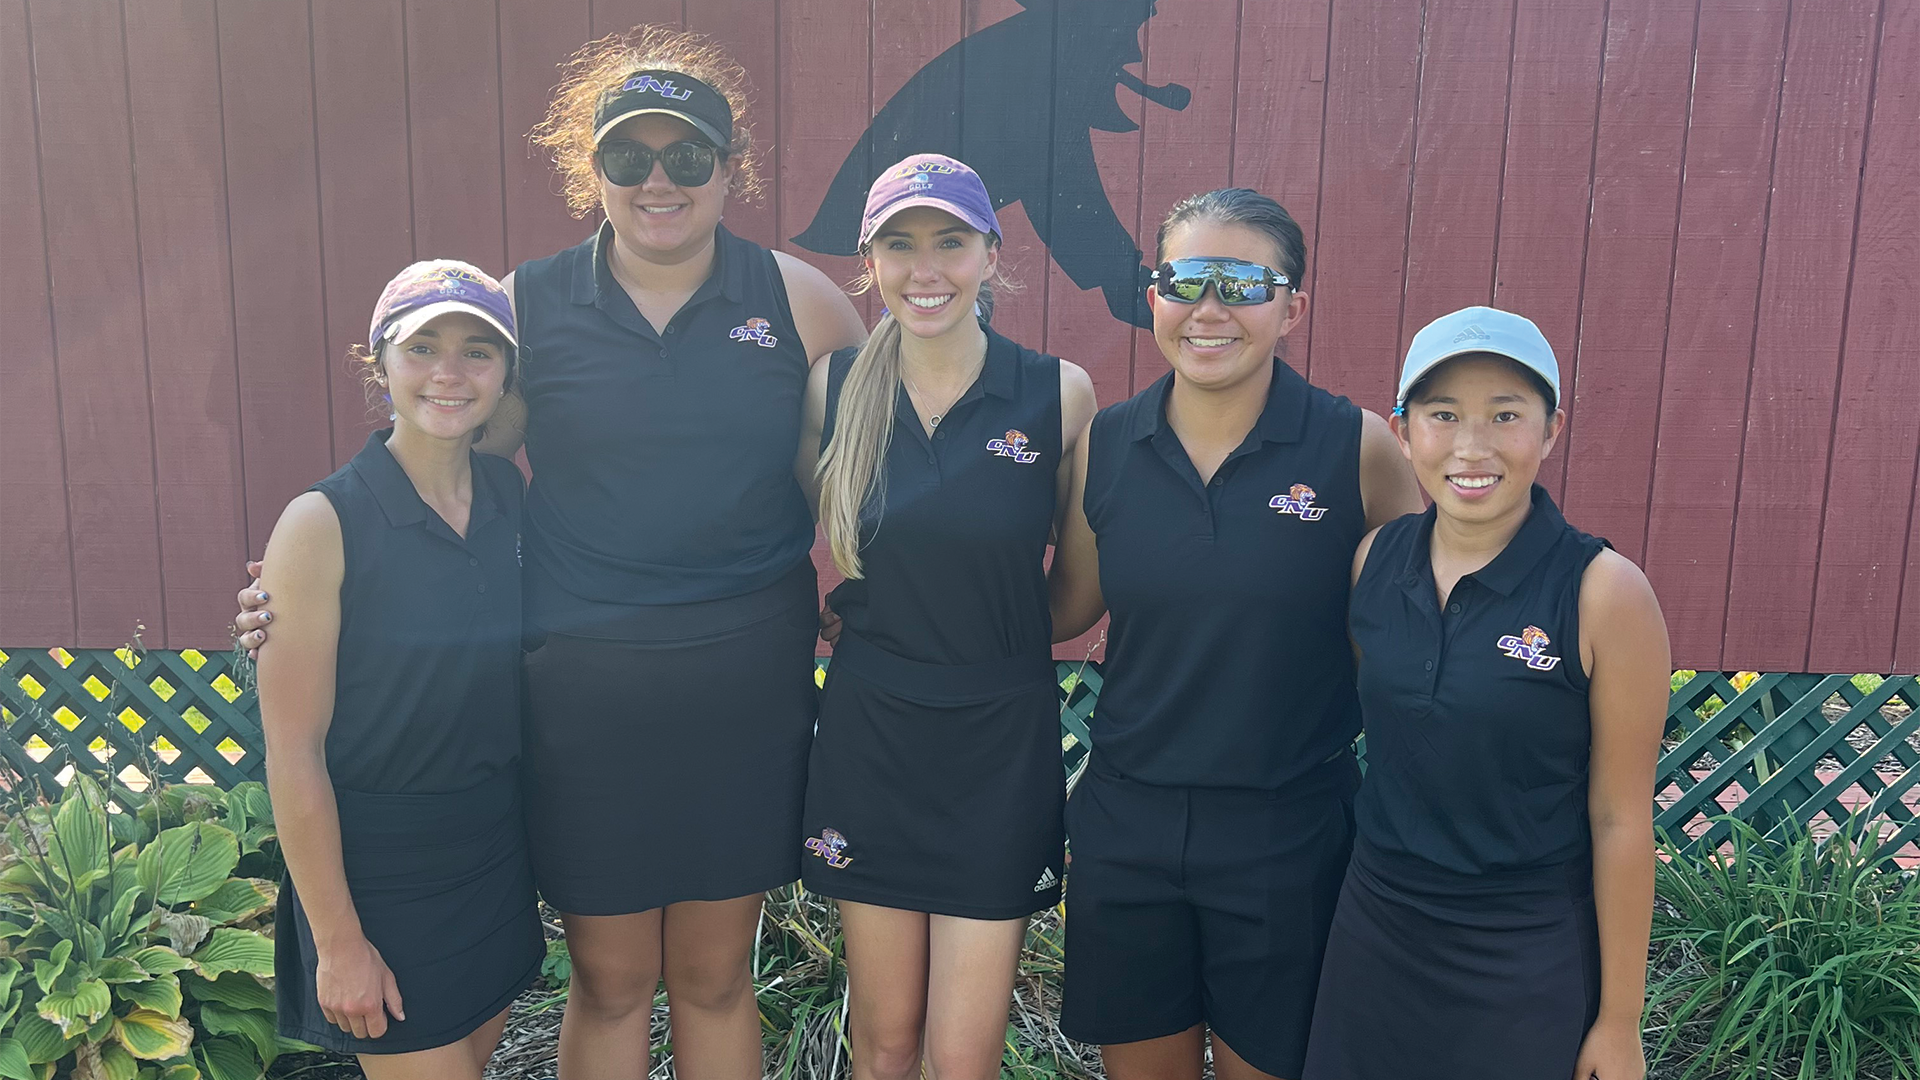 WOMEN’S GOLF FINISHES FIFTH AT BATTLE AT BLACKTHORN